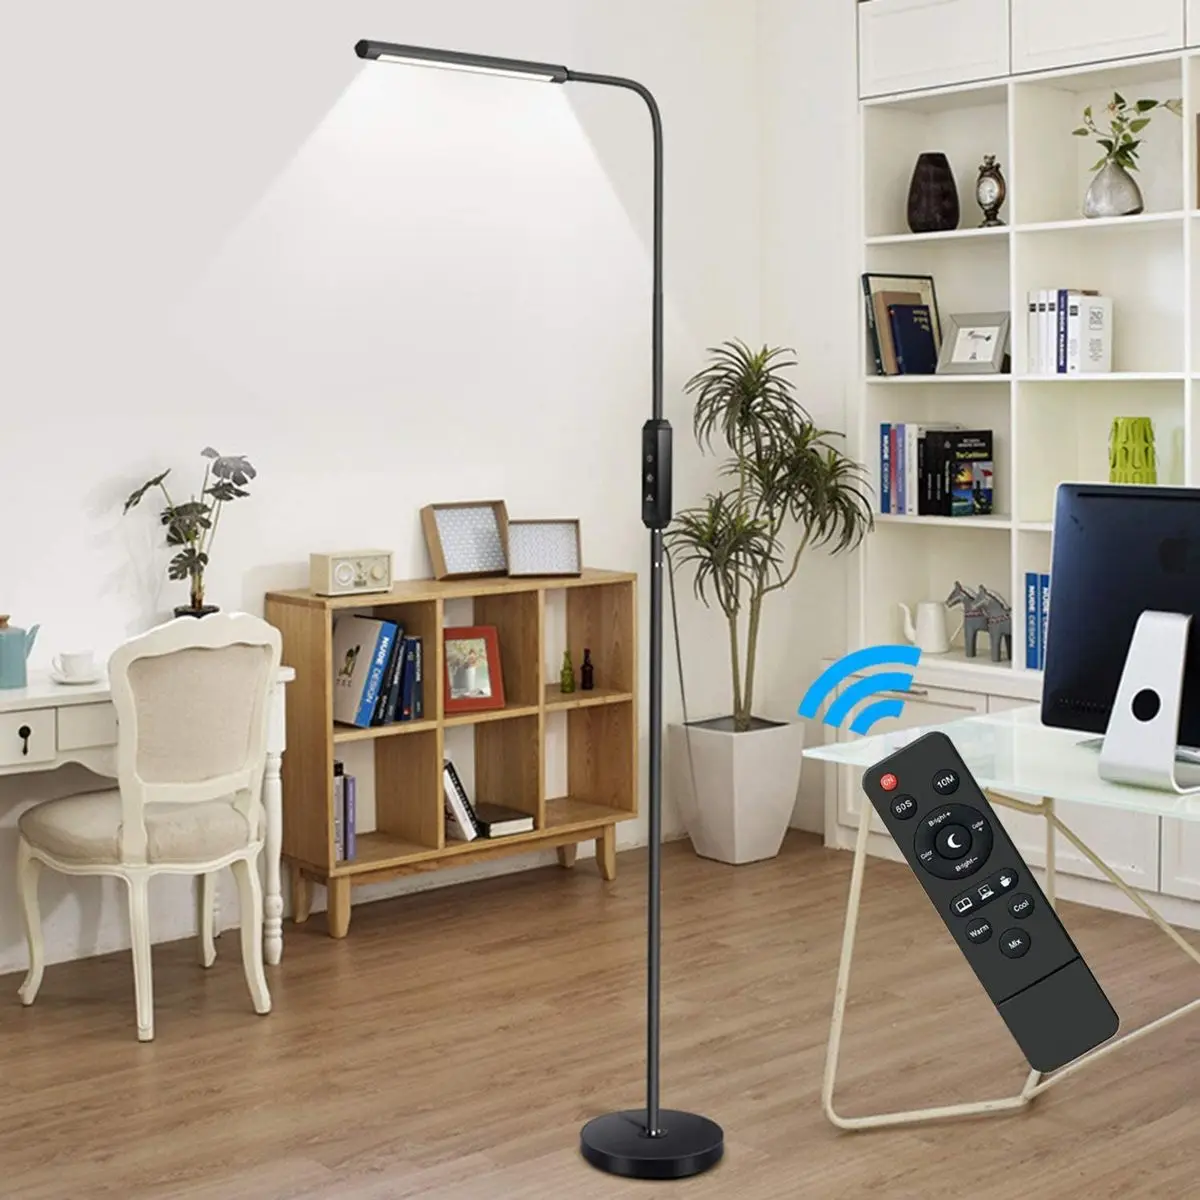 

LED Floor Touch Standing Lamps 5 Brightness Levels & 5 Colors Temperatures10W Dimmable LED Gooseneck for Living Room Bedroom